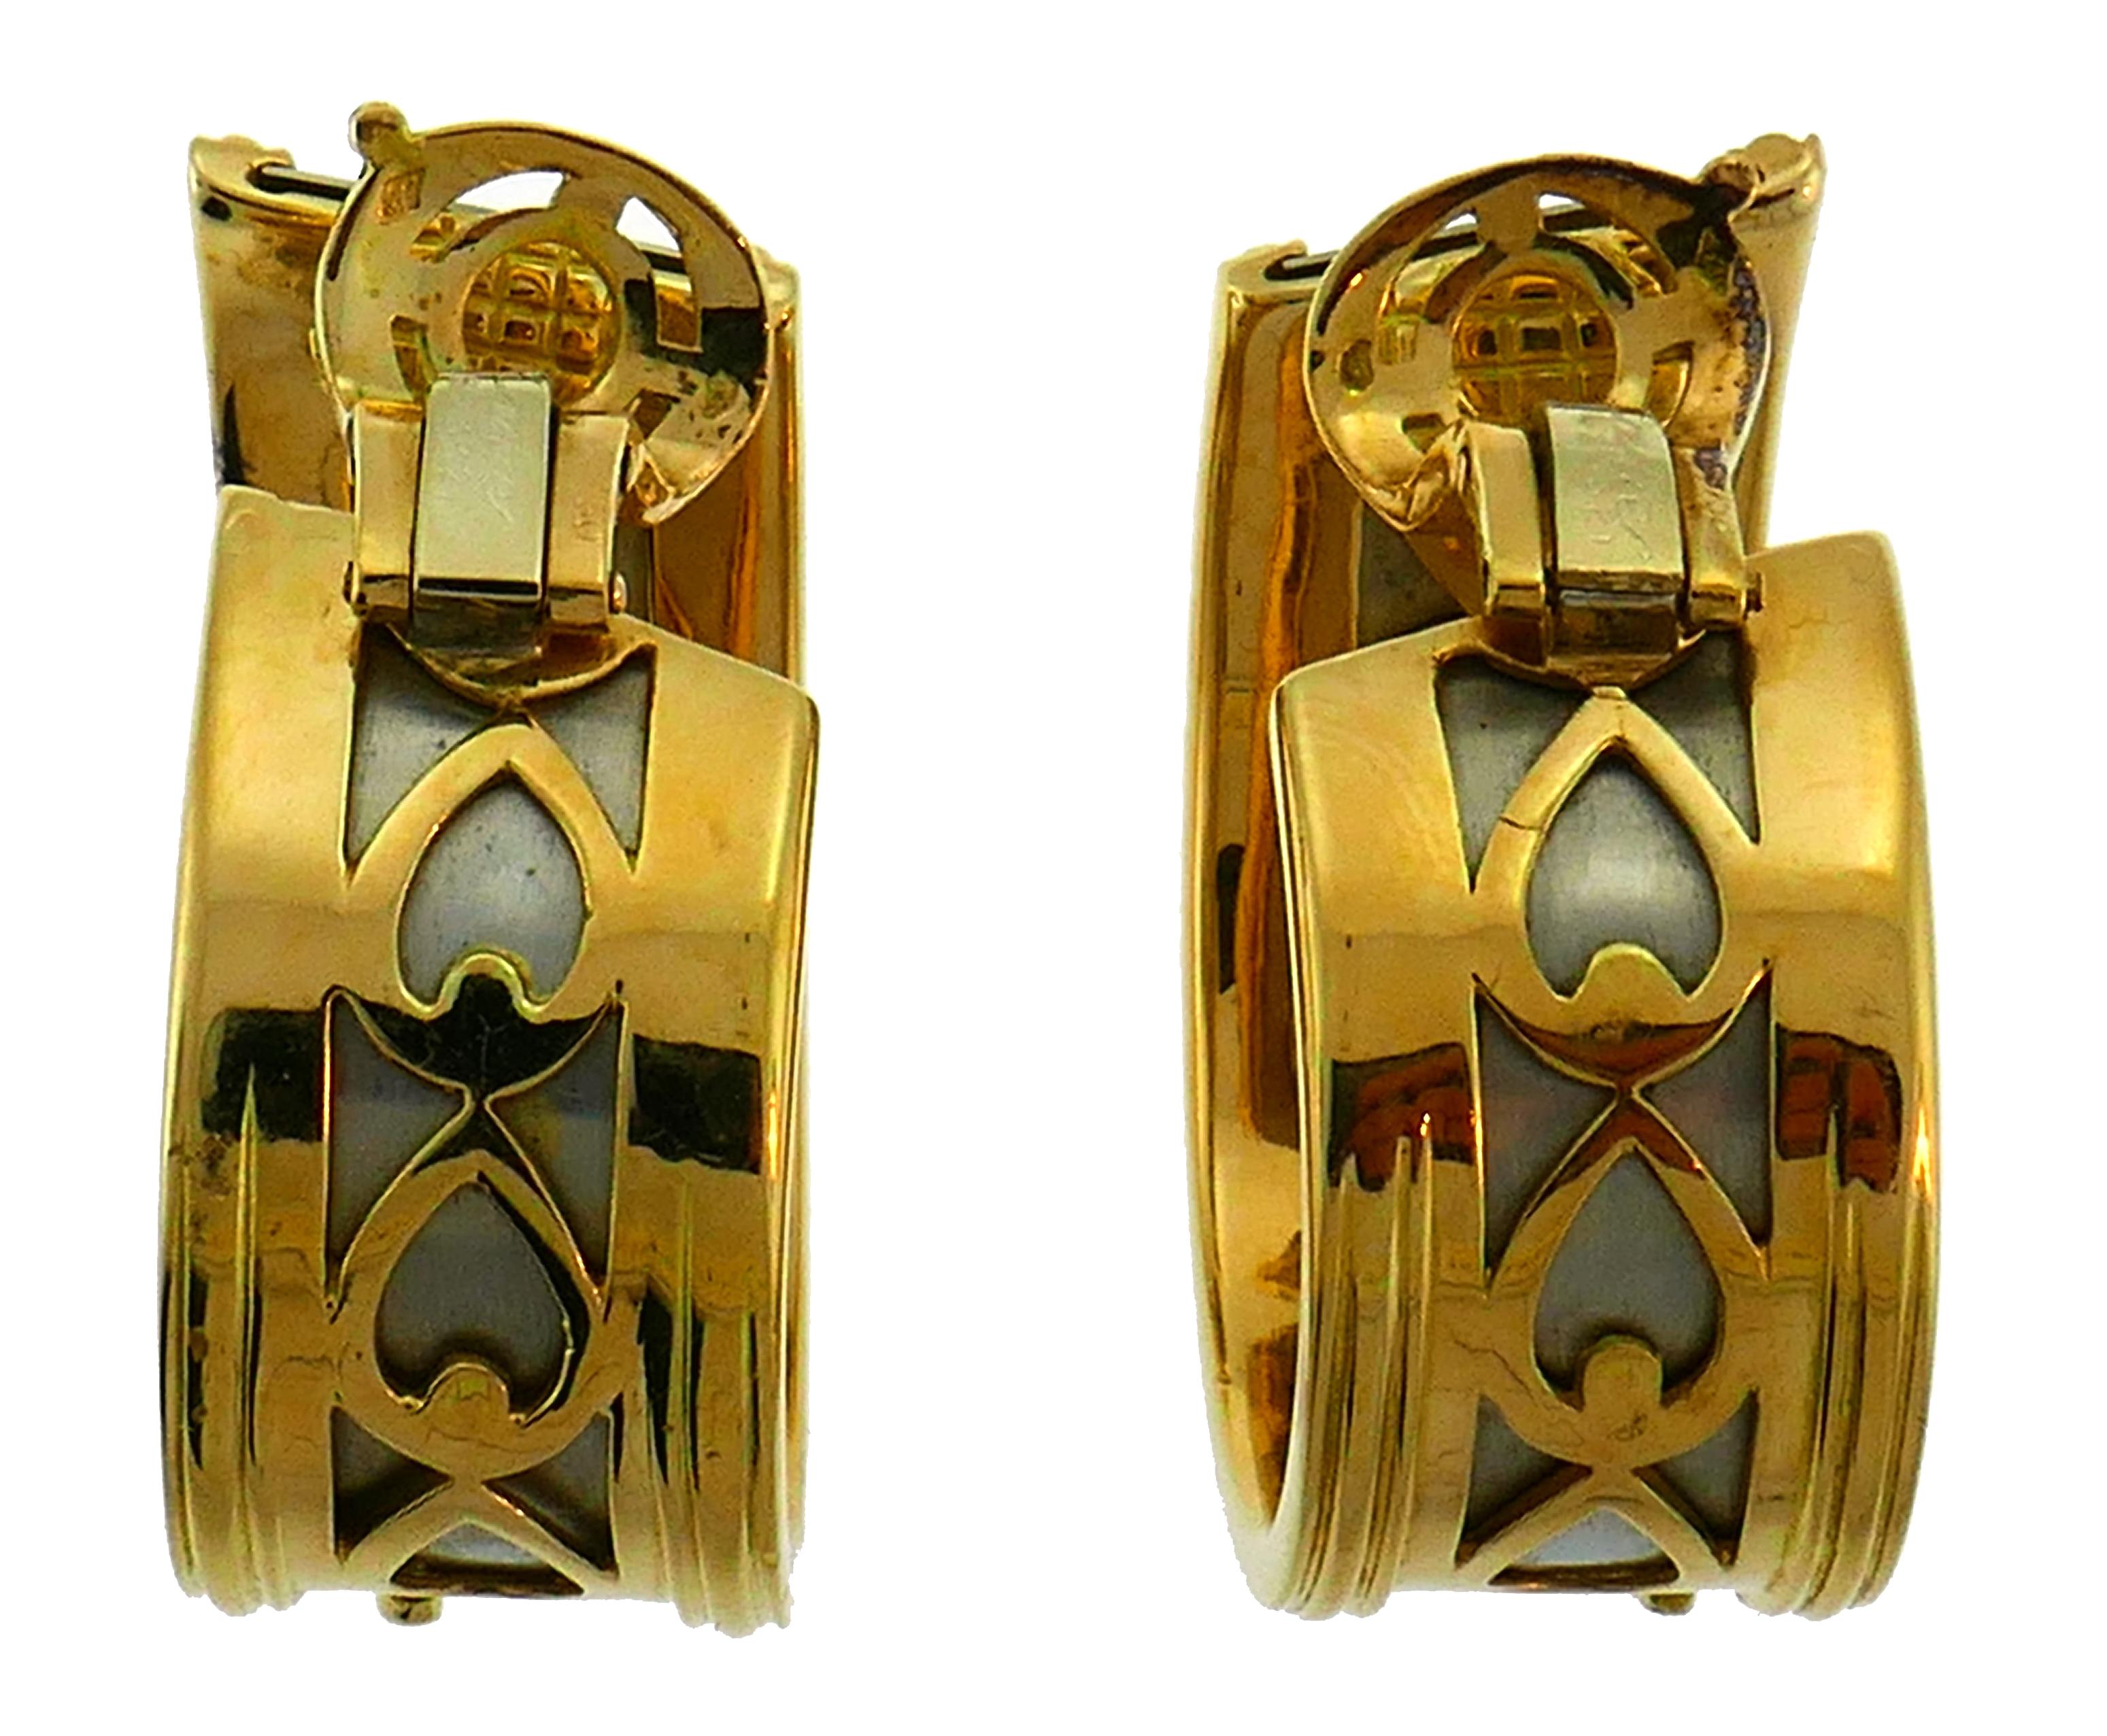 Signature Cartier Panthere Collection pair of hoop earrings. Bold, elegant and wearable, the earrings are a great addition to your treasure box. 
The earrings are made of 18 karat yellow and white gold. 
They measure 1-3/8 x 1/2 inches (3.4 x 1.4